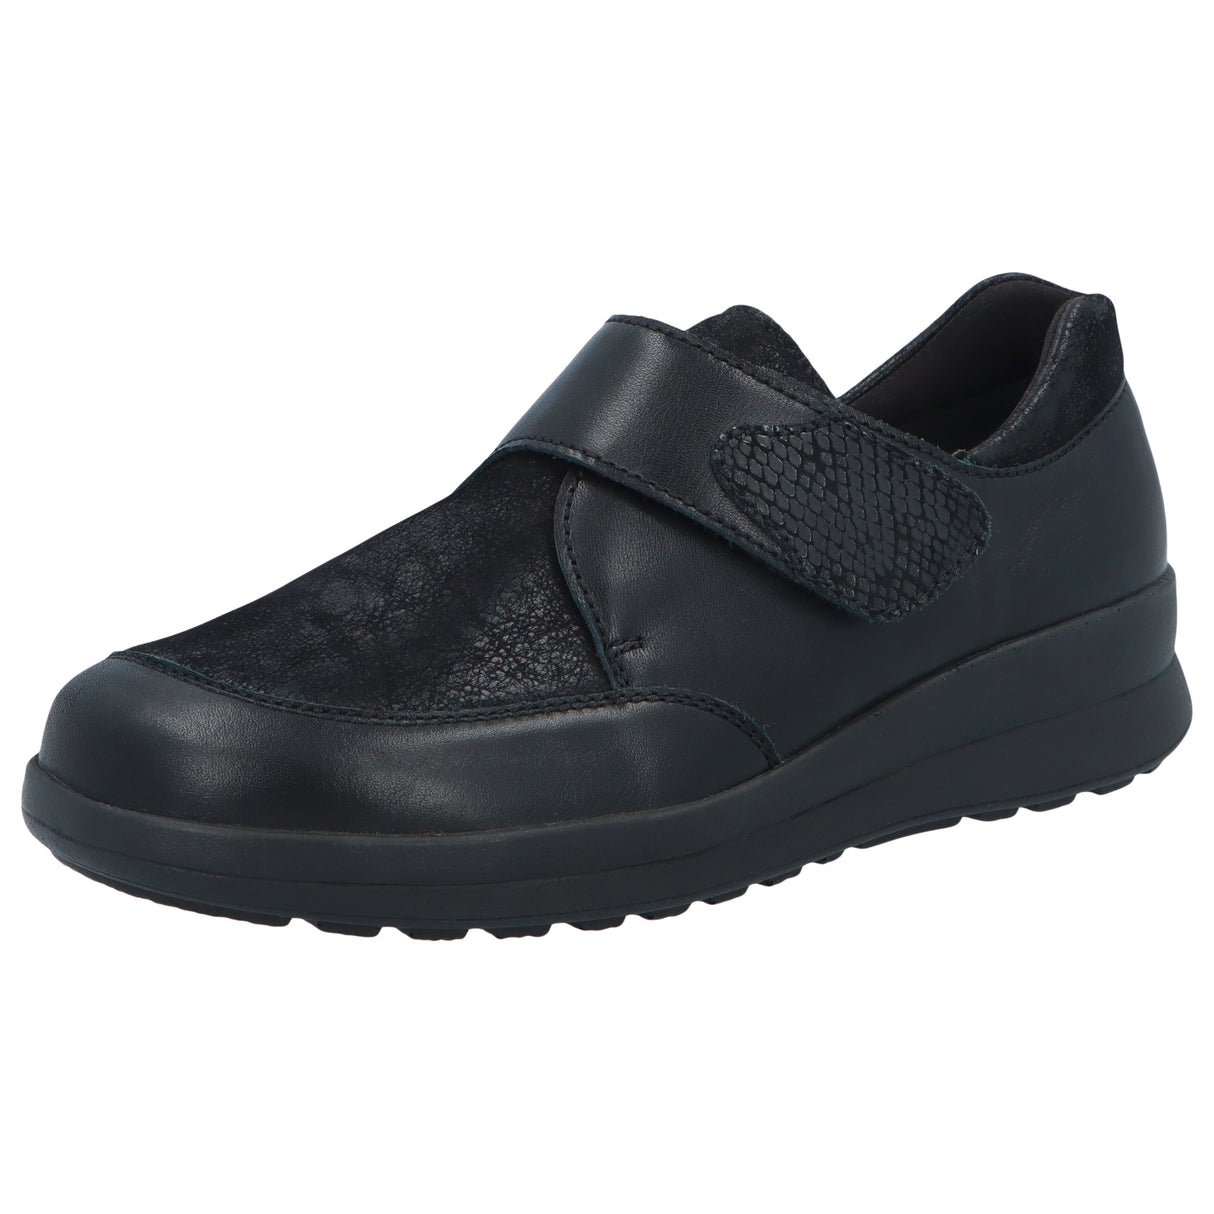 Venita | Casual shoes | Black with gloss